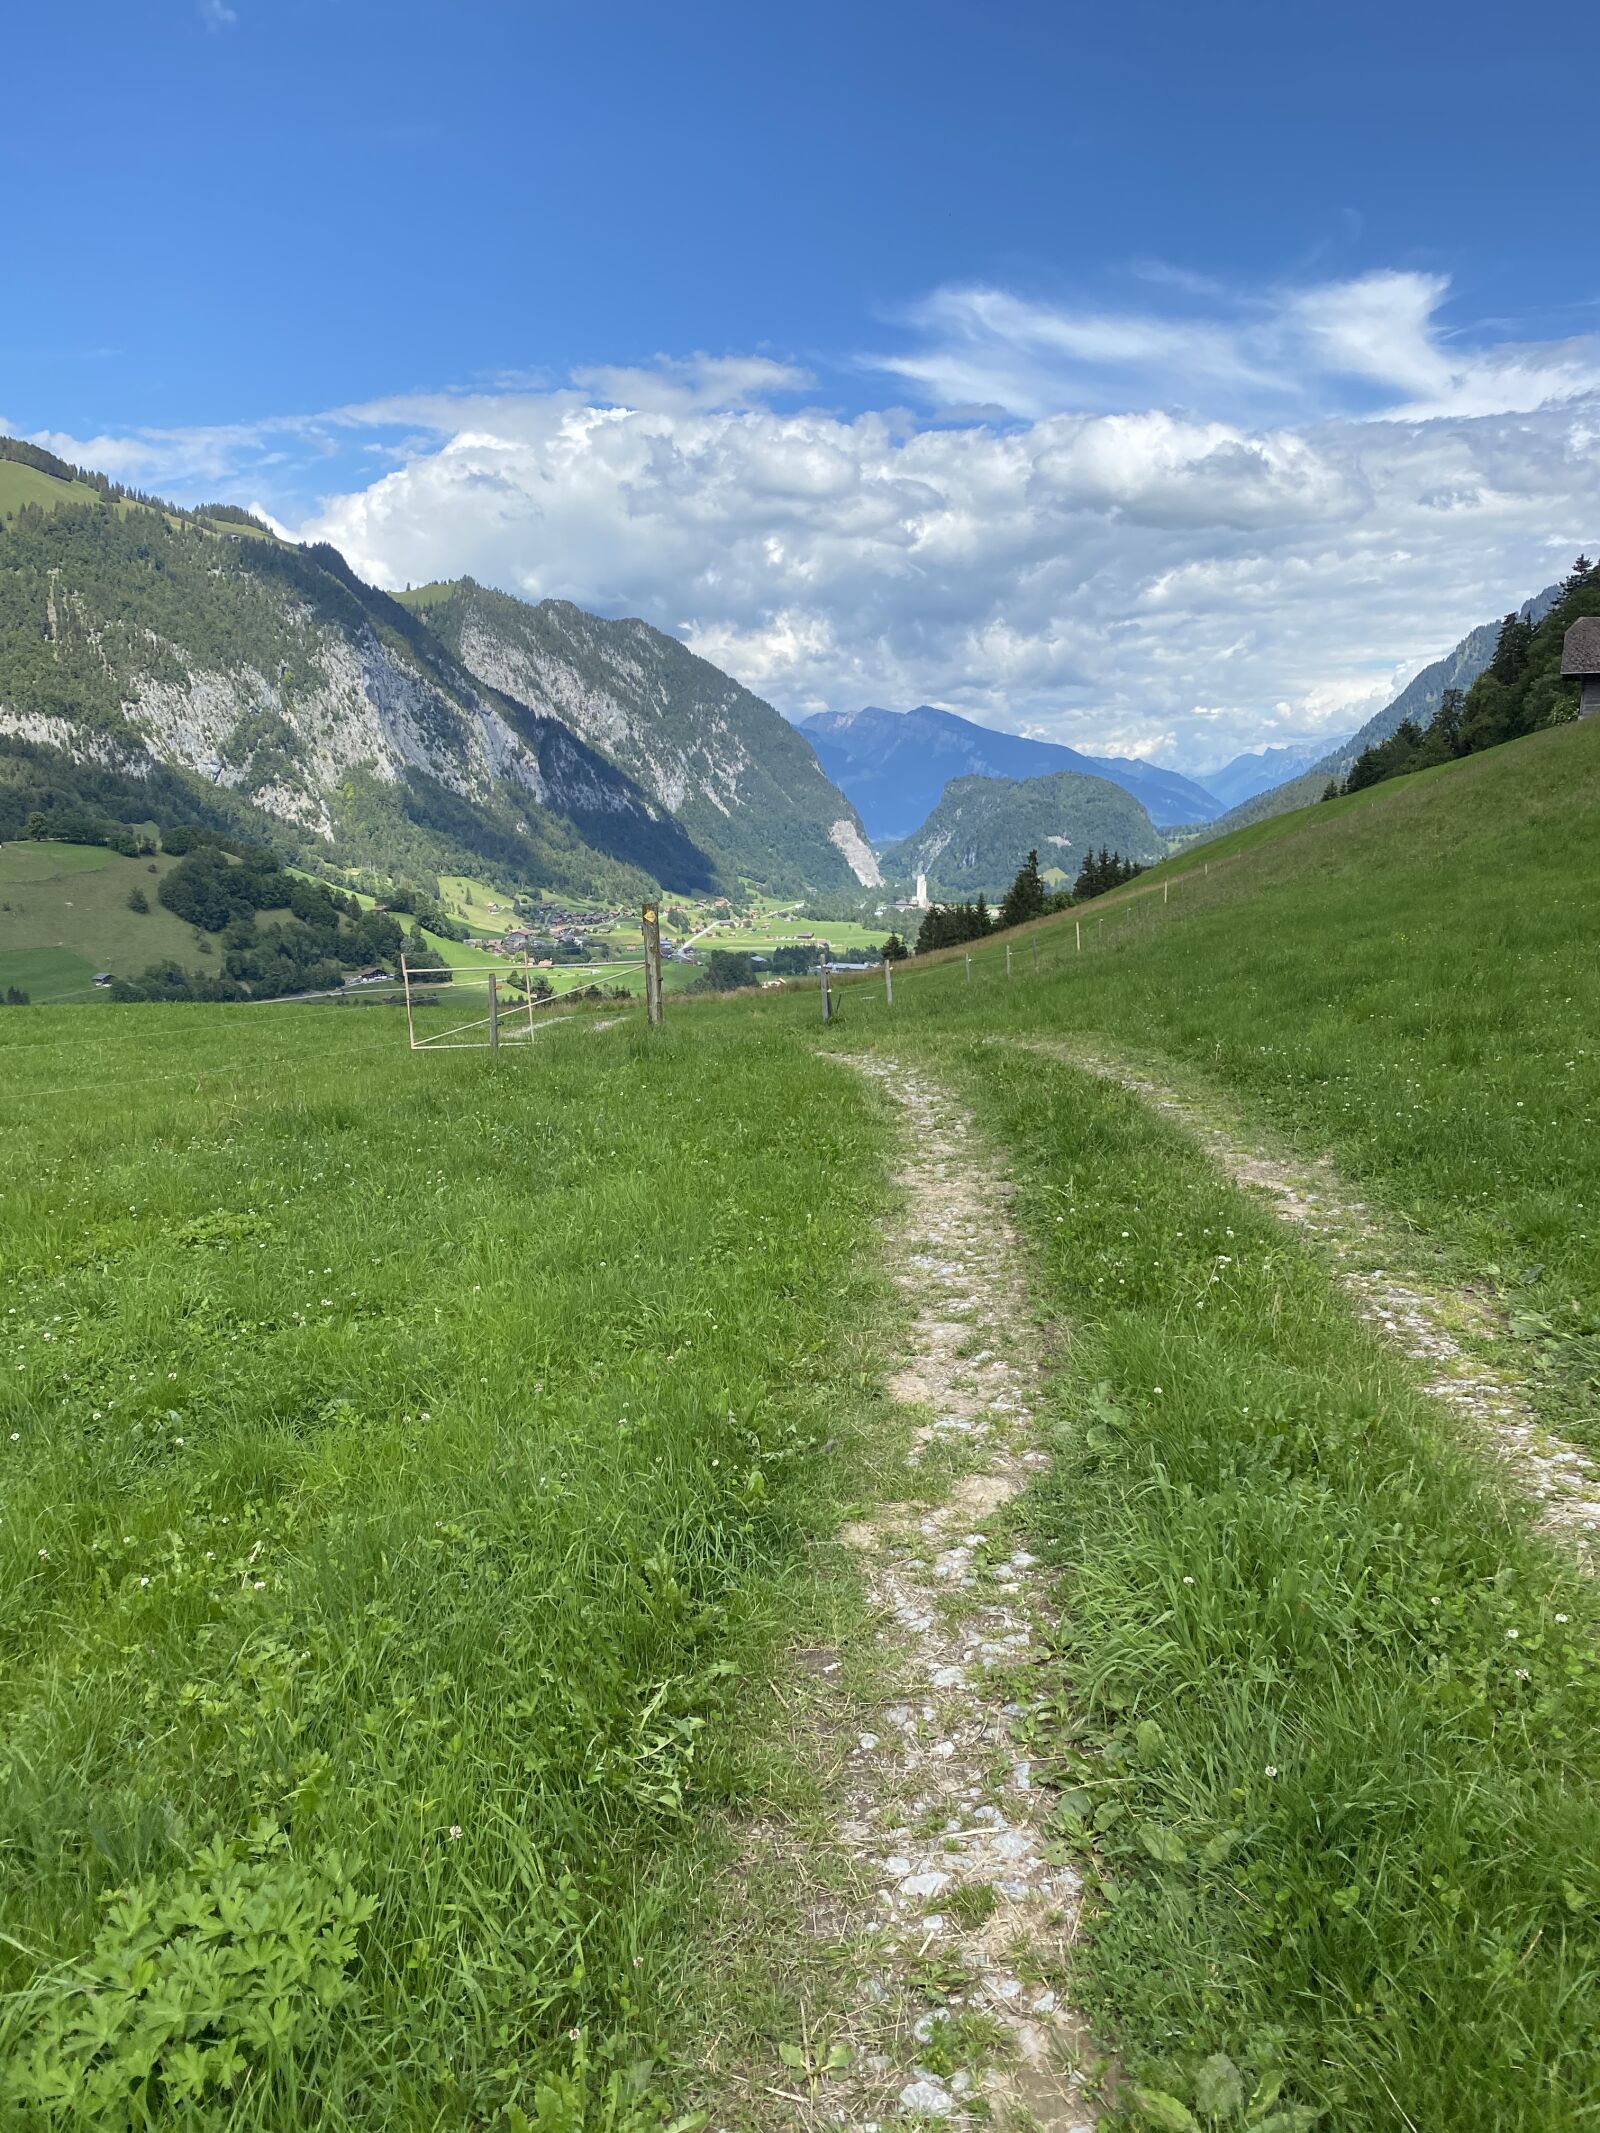 Apple iPhone 11 Pro Max sample photo. Switzerland, simmental, mountains photography